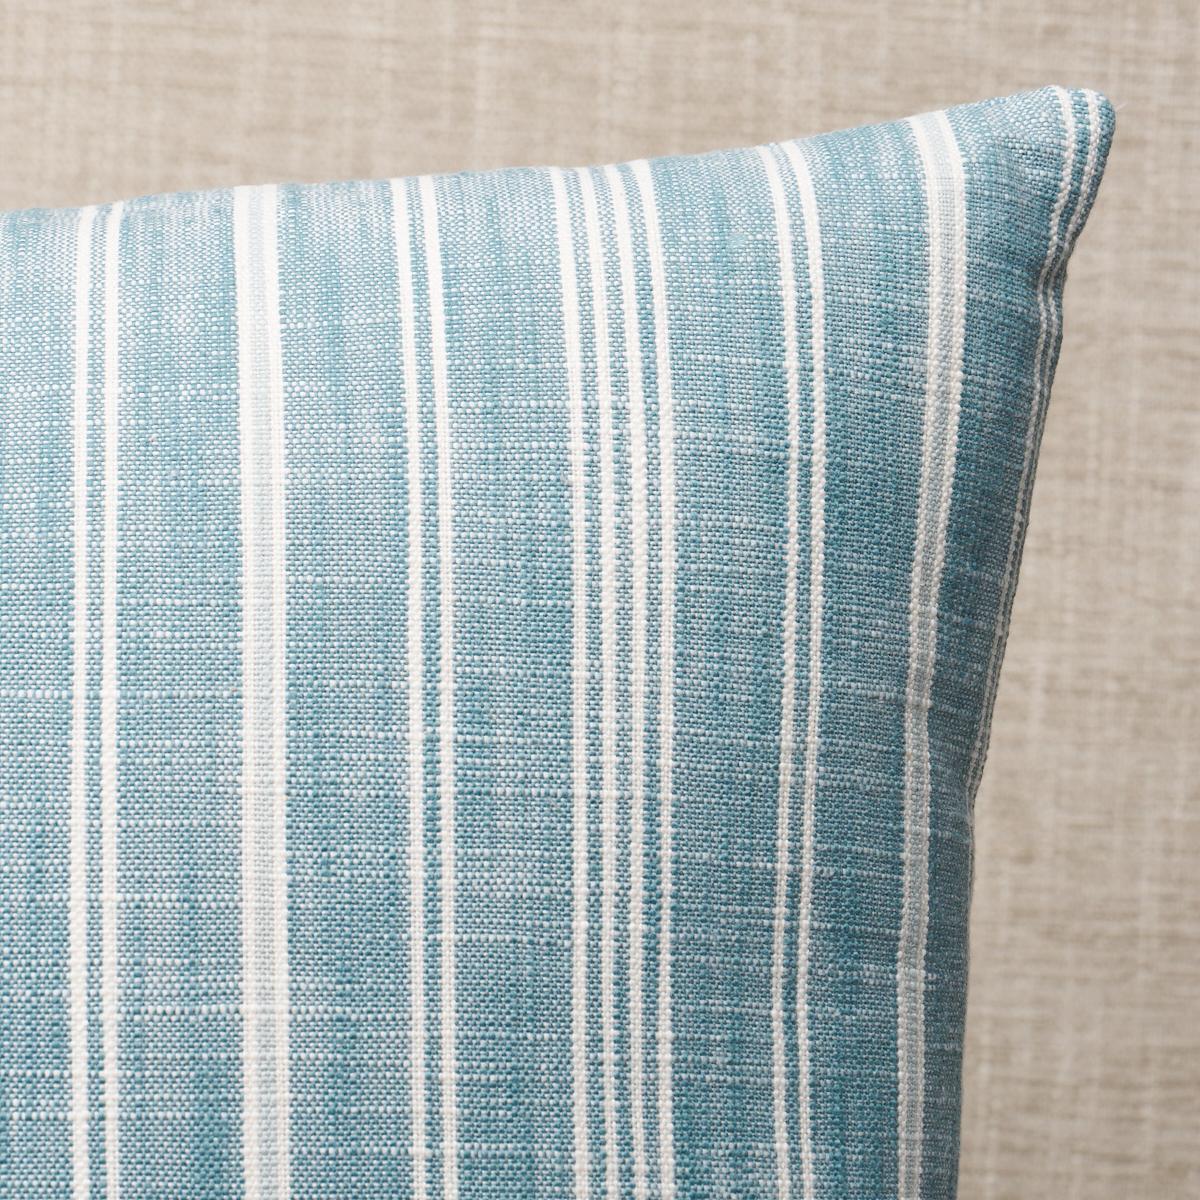 This pillow features Lucy Stripe by Mark D. Sikes with a knife edge finish. Mark D. Sikes had style and versatility in mind when he created Lucy Stripe, an updated version of a traditional batik stripe. Pillow includes a feather/down fill insert and